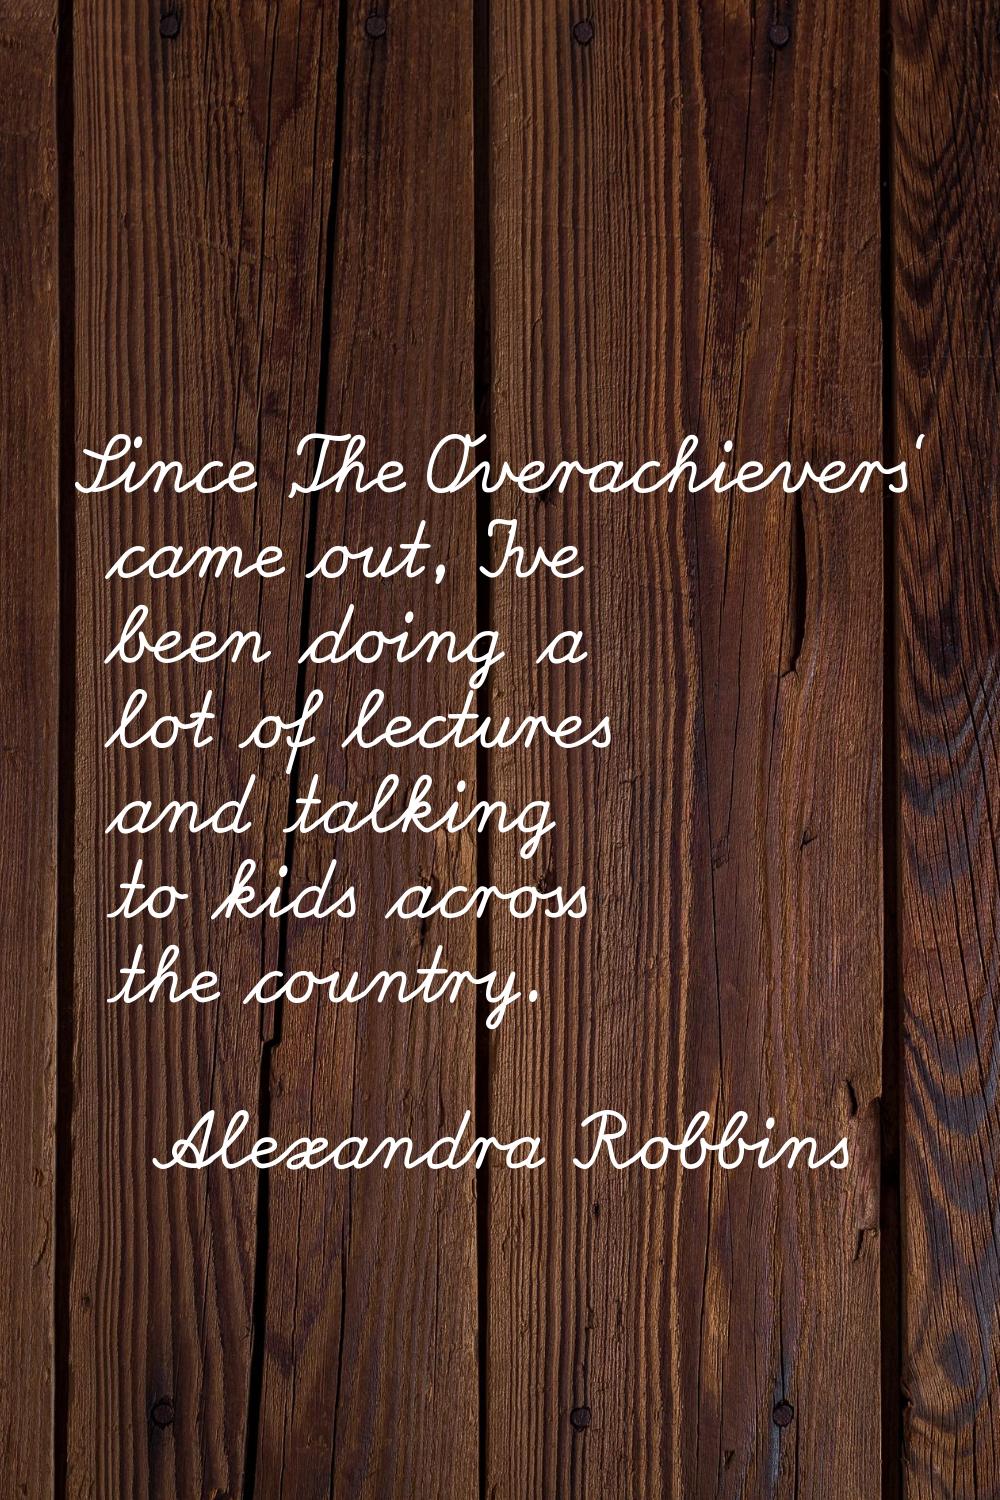 Since 'The Overachievers' came out, I've been doing a lot of lectures and talking to kids across th